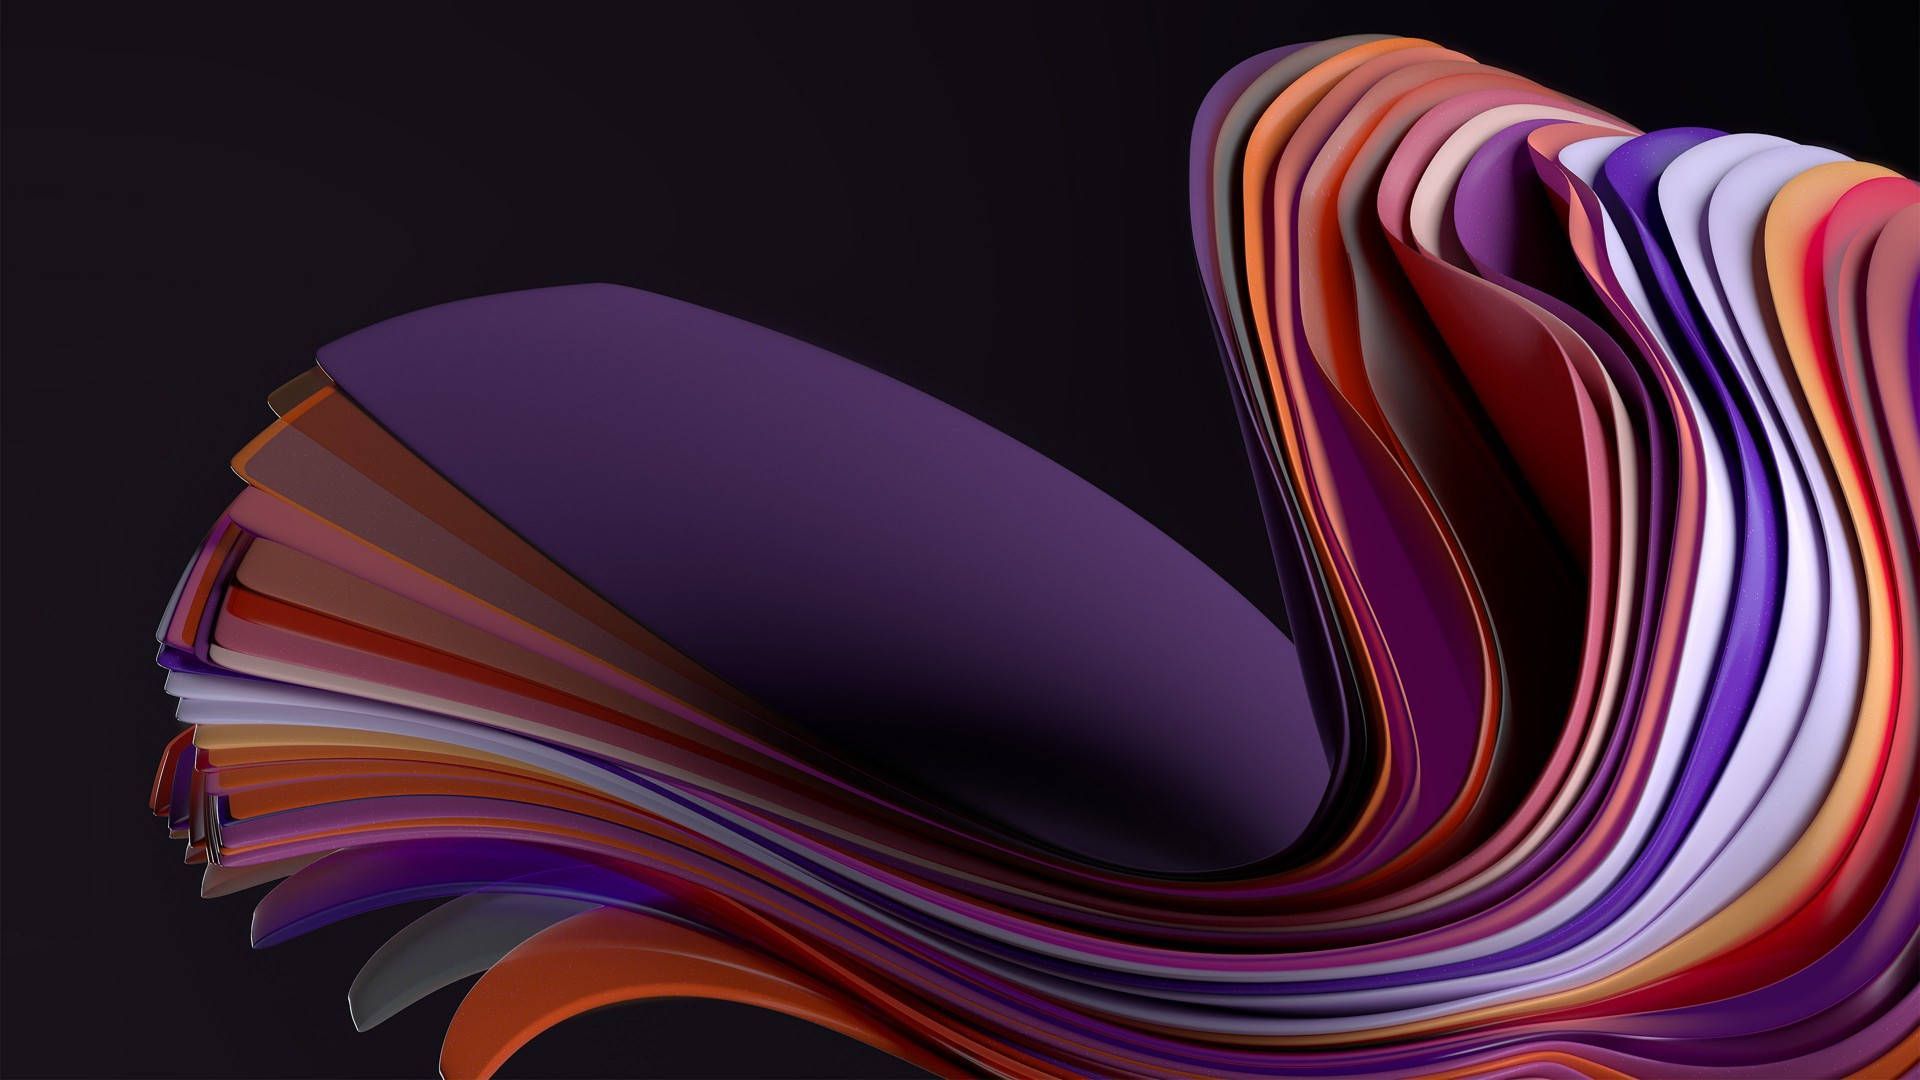 A abstract image of a purple and orange wave - Windows 11